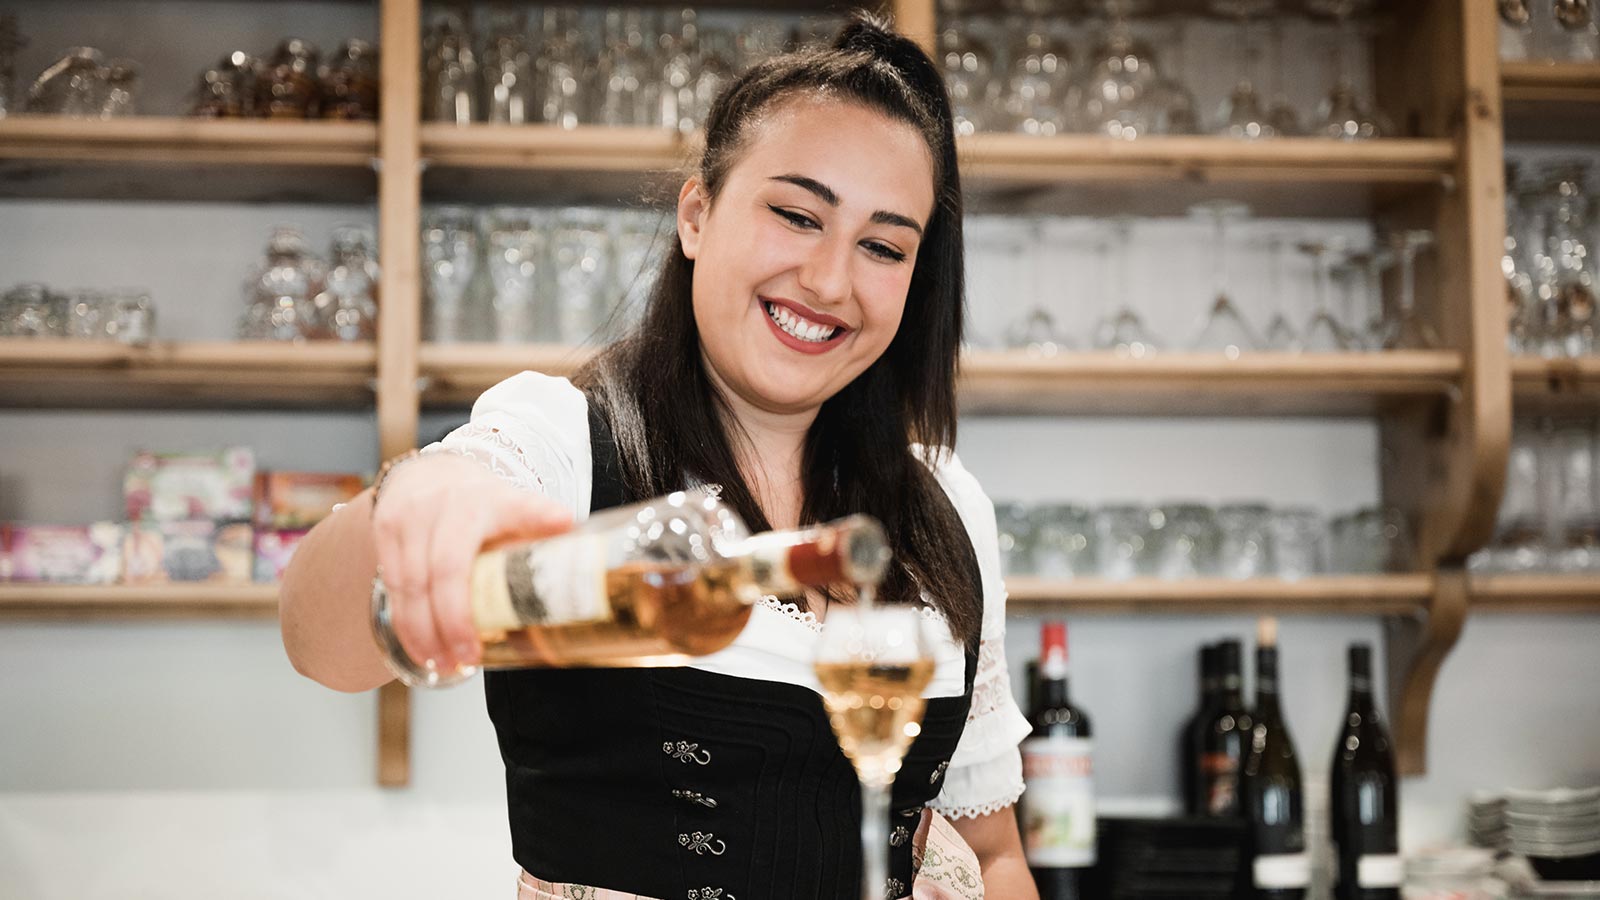 A bartender in traditional dress pours a glass of grappa at the bar counter